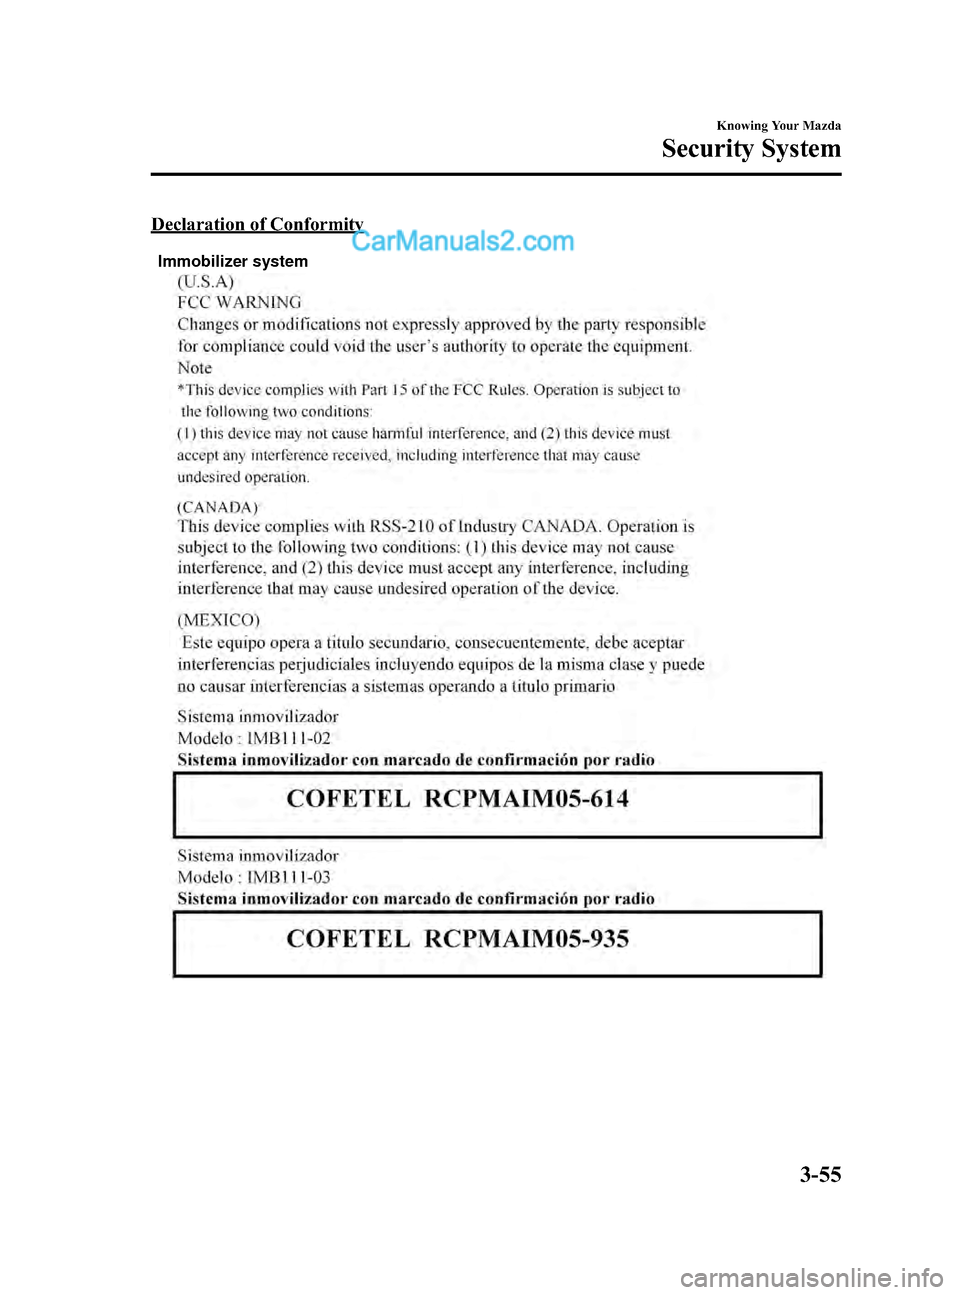 MAZDA MODEL CX-9 2015  Owners Manual (in English) Black plate (143,1)
Declaration of Conformity
Immobilizer system
Knowing Your Mazda
Security System
3-55
CX-9_8DU1-EA-14H_Edition1 Page143
Thursday, June 5 2014 4:17 PM
Form No.8DU1-EA-14H  